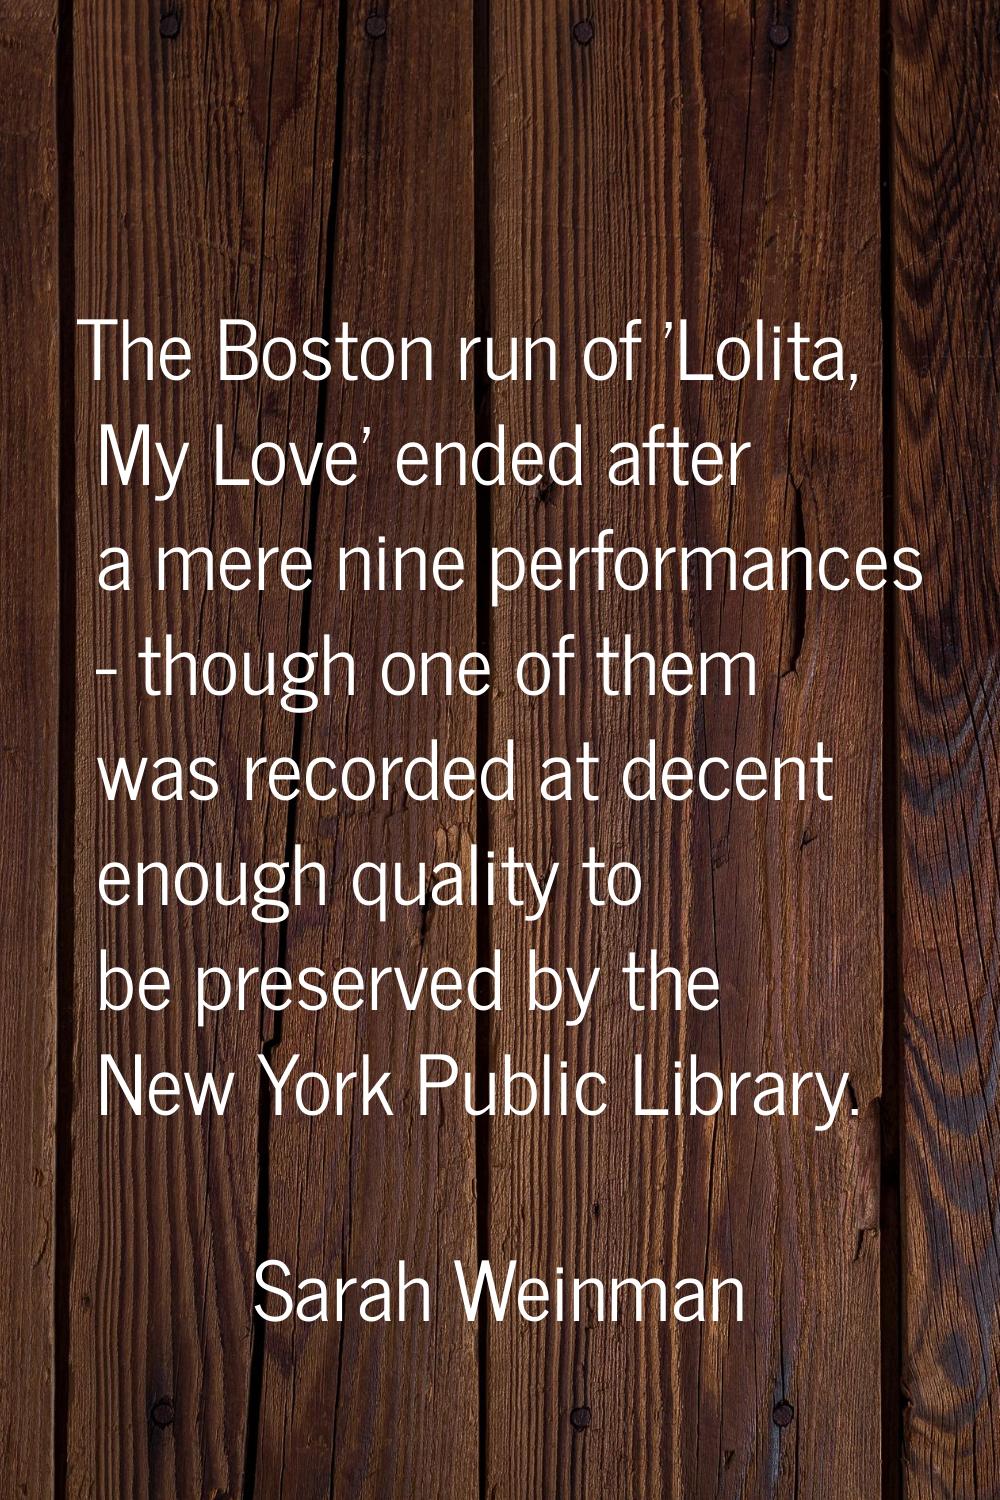 The Boston run of 'Lolita, My Love' ended after a mere nine performances - though one of them was r